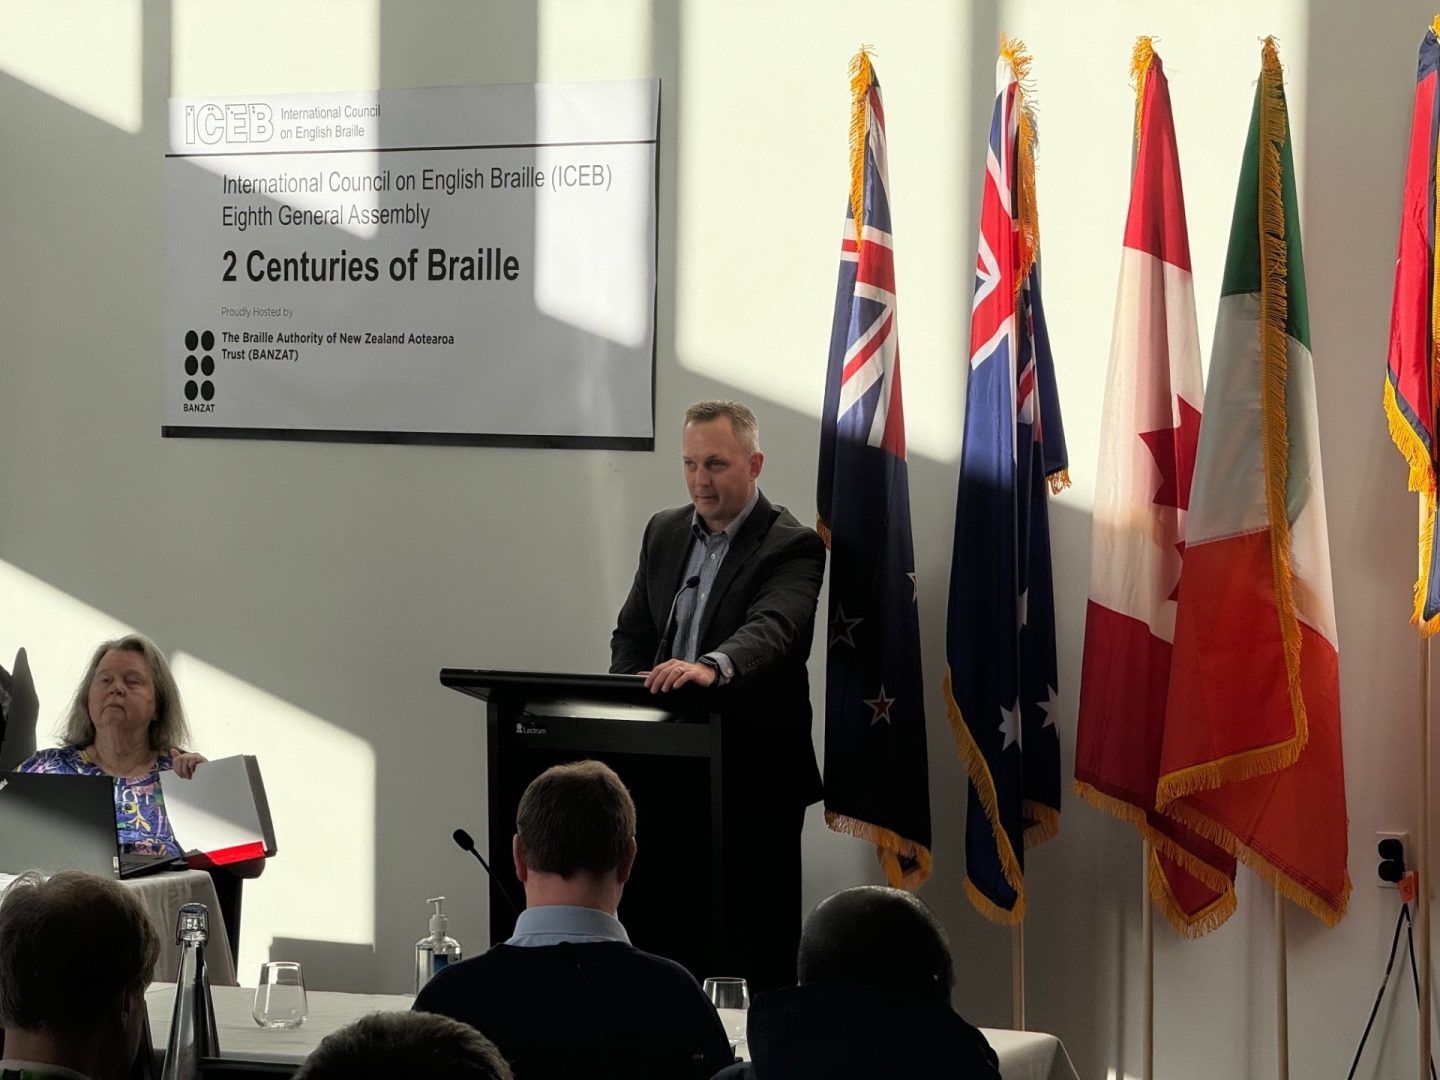 An APH employee speaks from behind a podium as a dramatic shadow, likely of a windowpane, can be seen on the wall behind him. To his left are five international flags. To his right, there is a white banner with the words "International Council of English Braille (ICEB) Eight General Assembly. 2 Centuries of Braille. Proudly Hosted by The Braille Authority of New Zealand Aotearoa" and an older woman seated in front of a laptop.